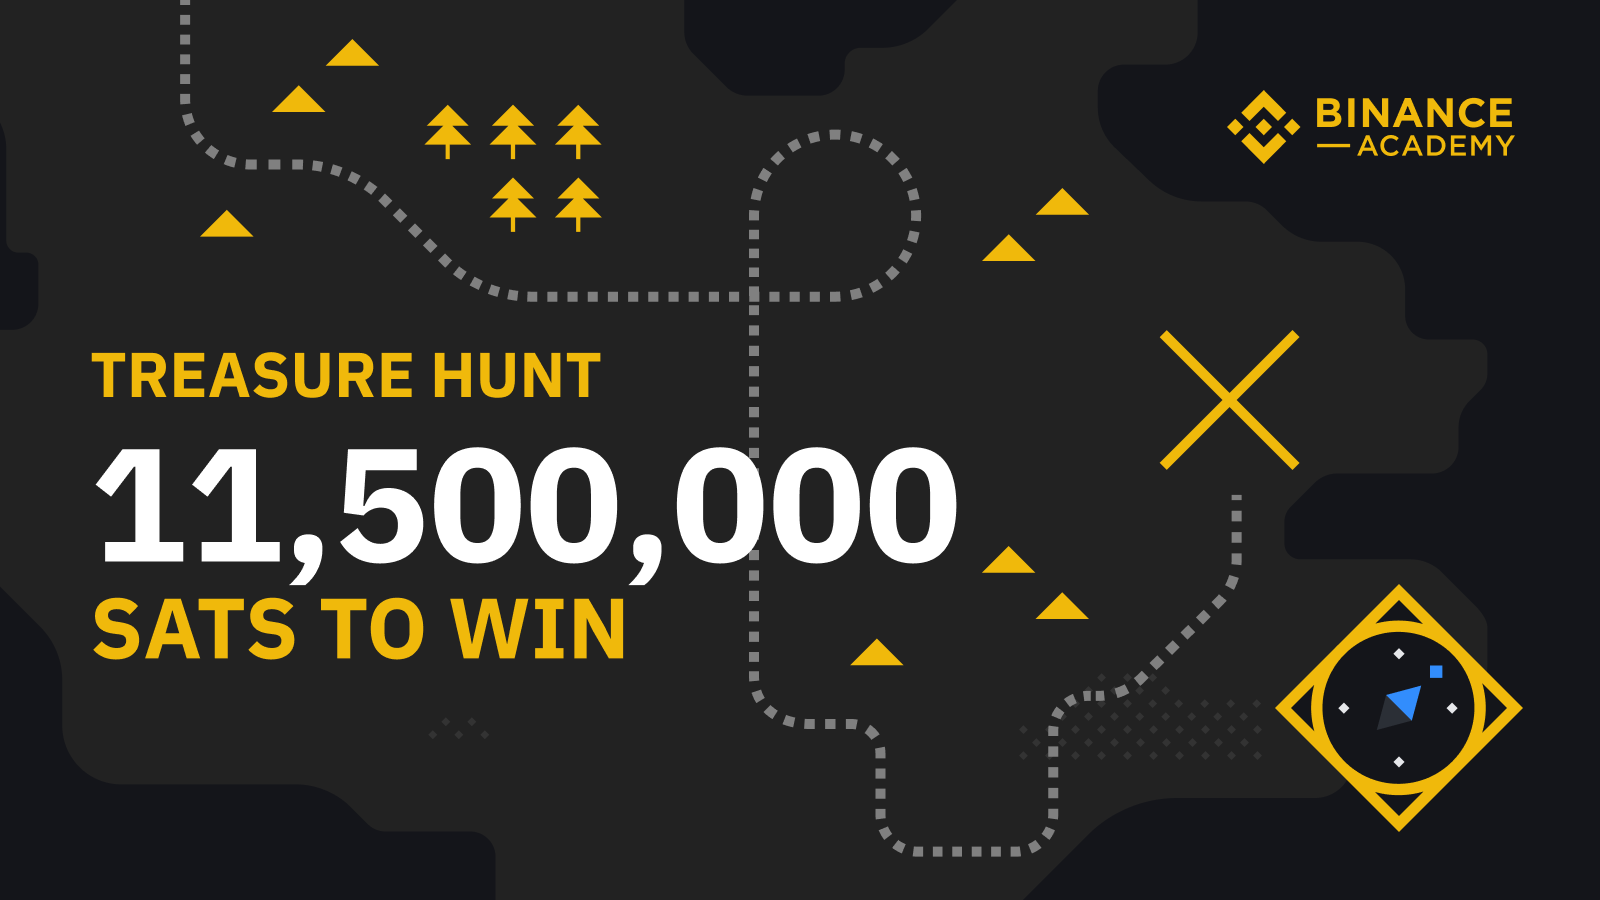 Bitcoin Treasure Hunt Combines Art and Prize of $10, in BTC | Video | CoinDesk